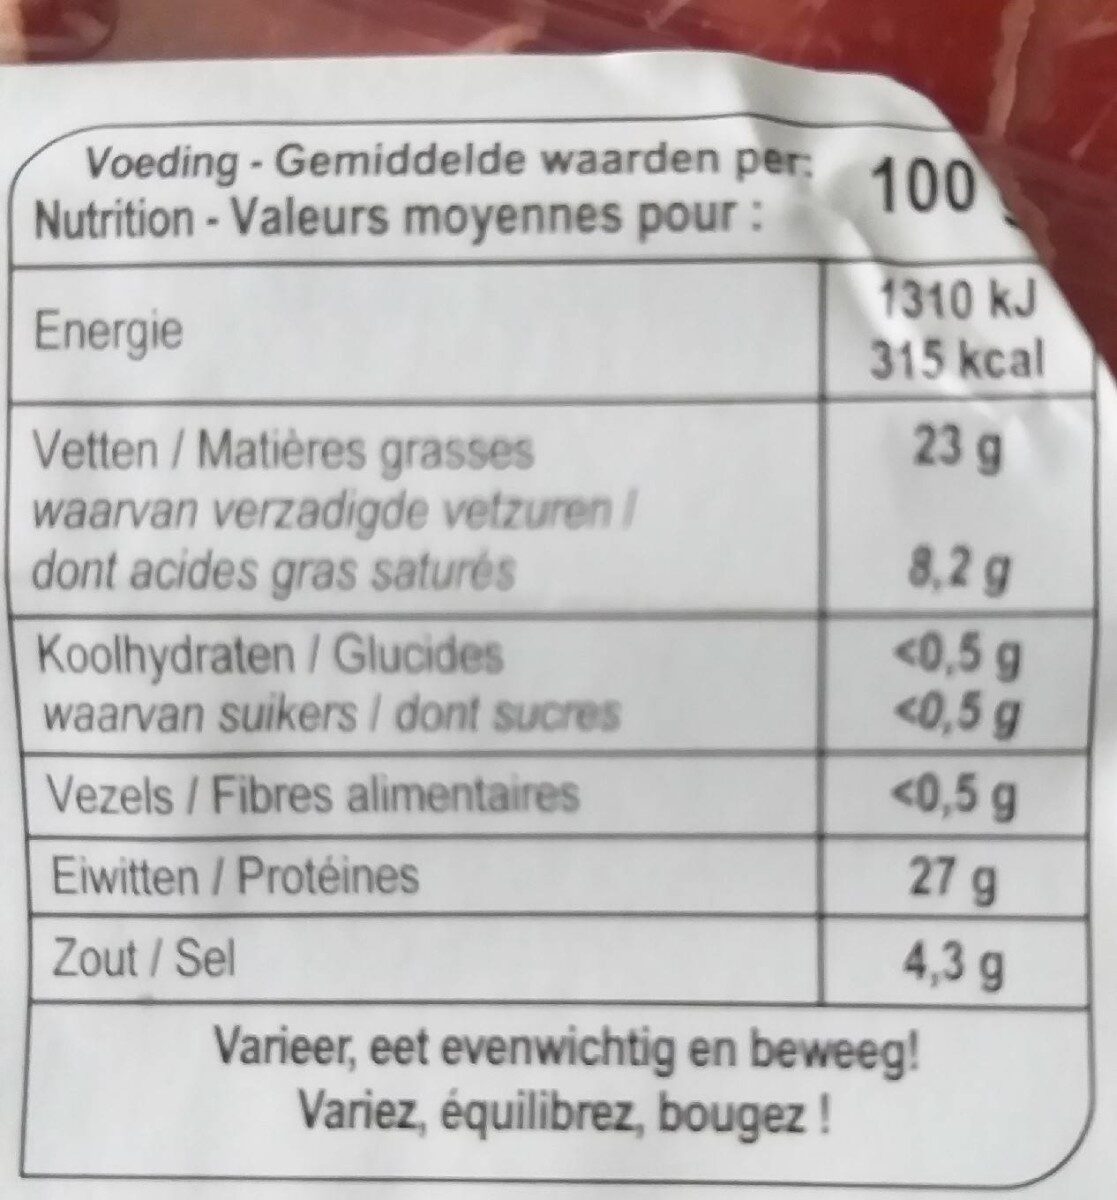 Coppa - Nutrition facts - fr